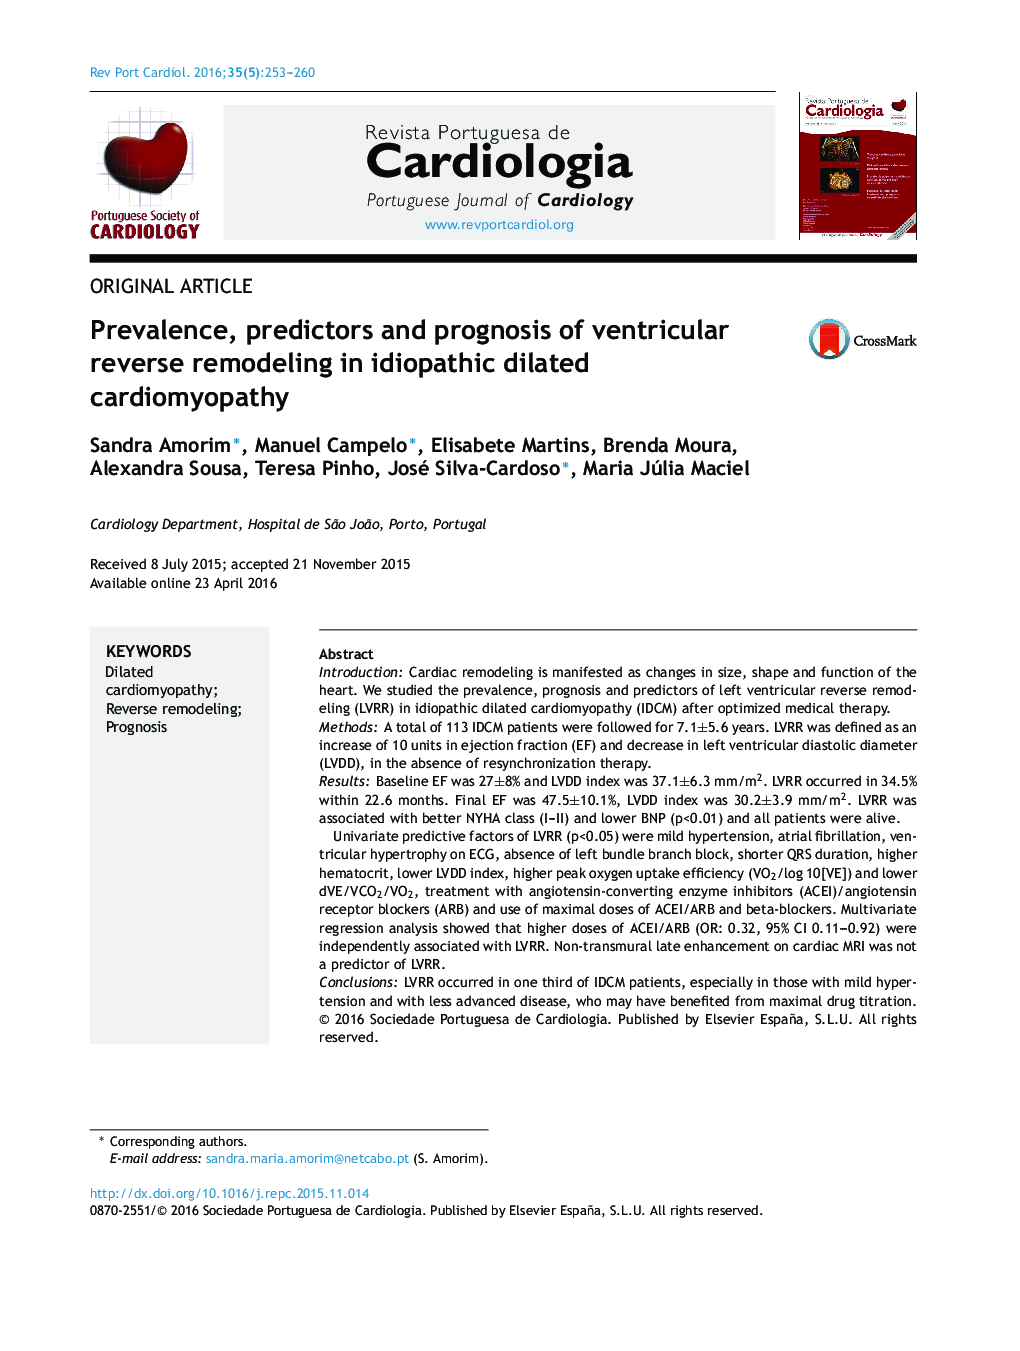 Prevalence, predictors and prognosis of ventricular reverse remodeling in idiopathic dilated cardiomyopathy